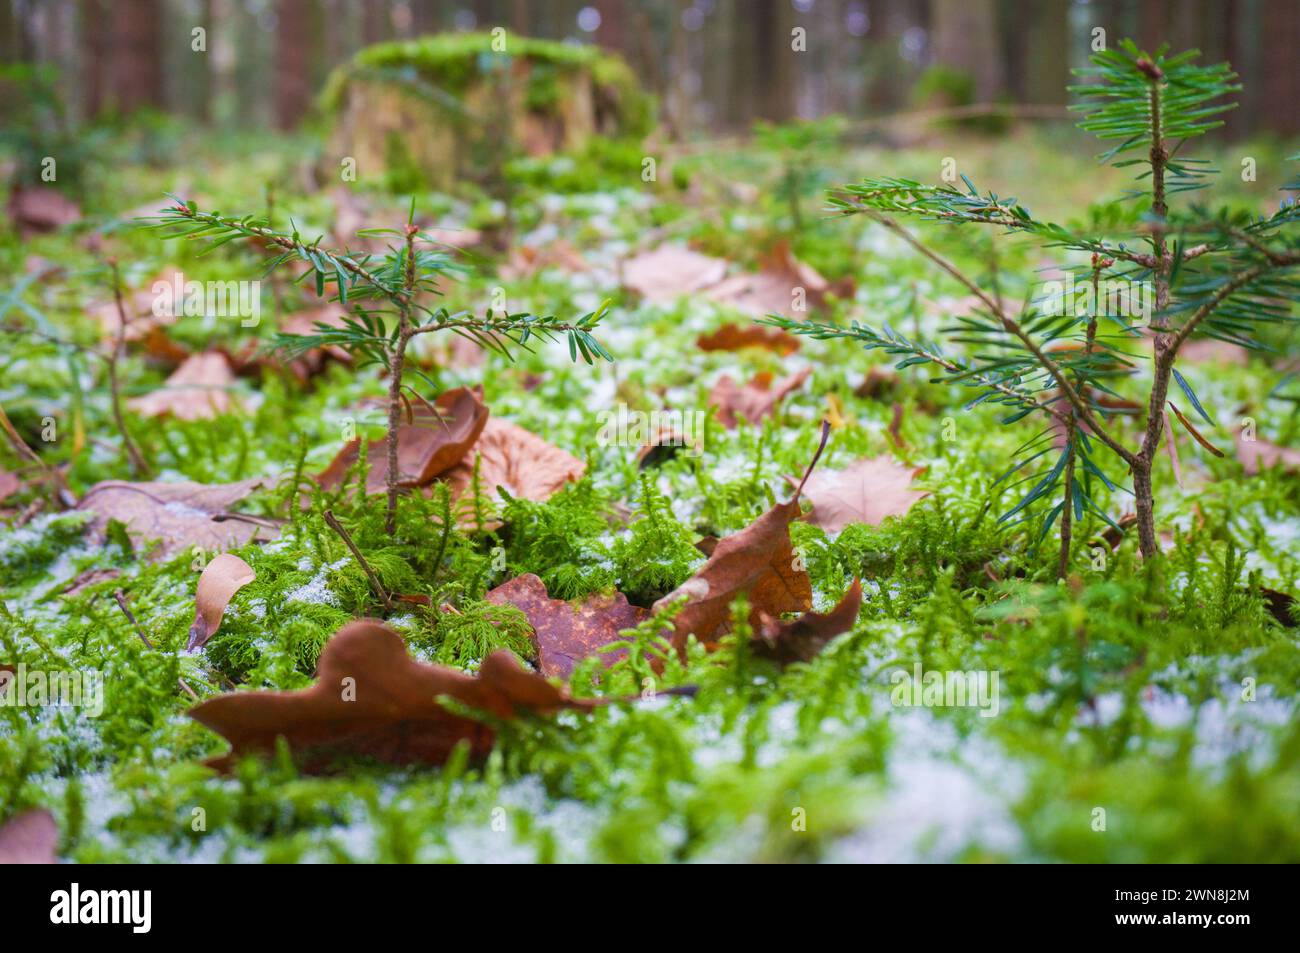 Close-up view of coniferous seedlings and brown leaves with snowflakes on mossy forest floor Stock Photo